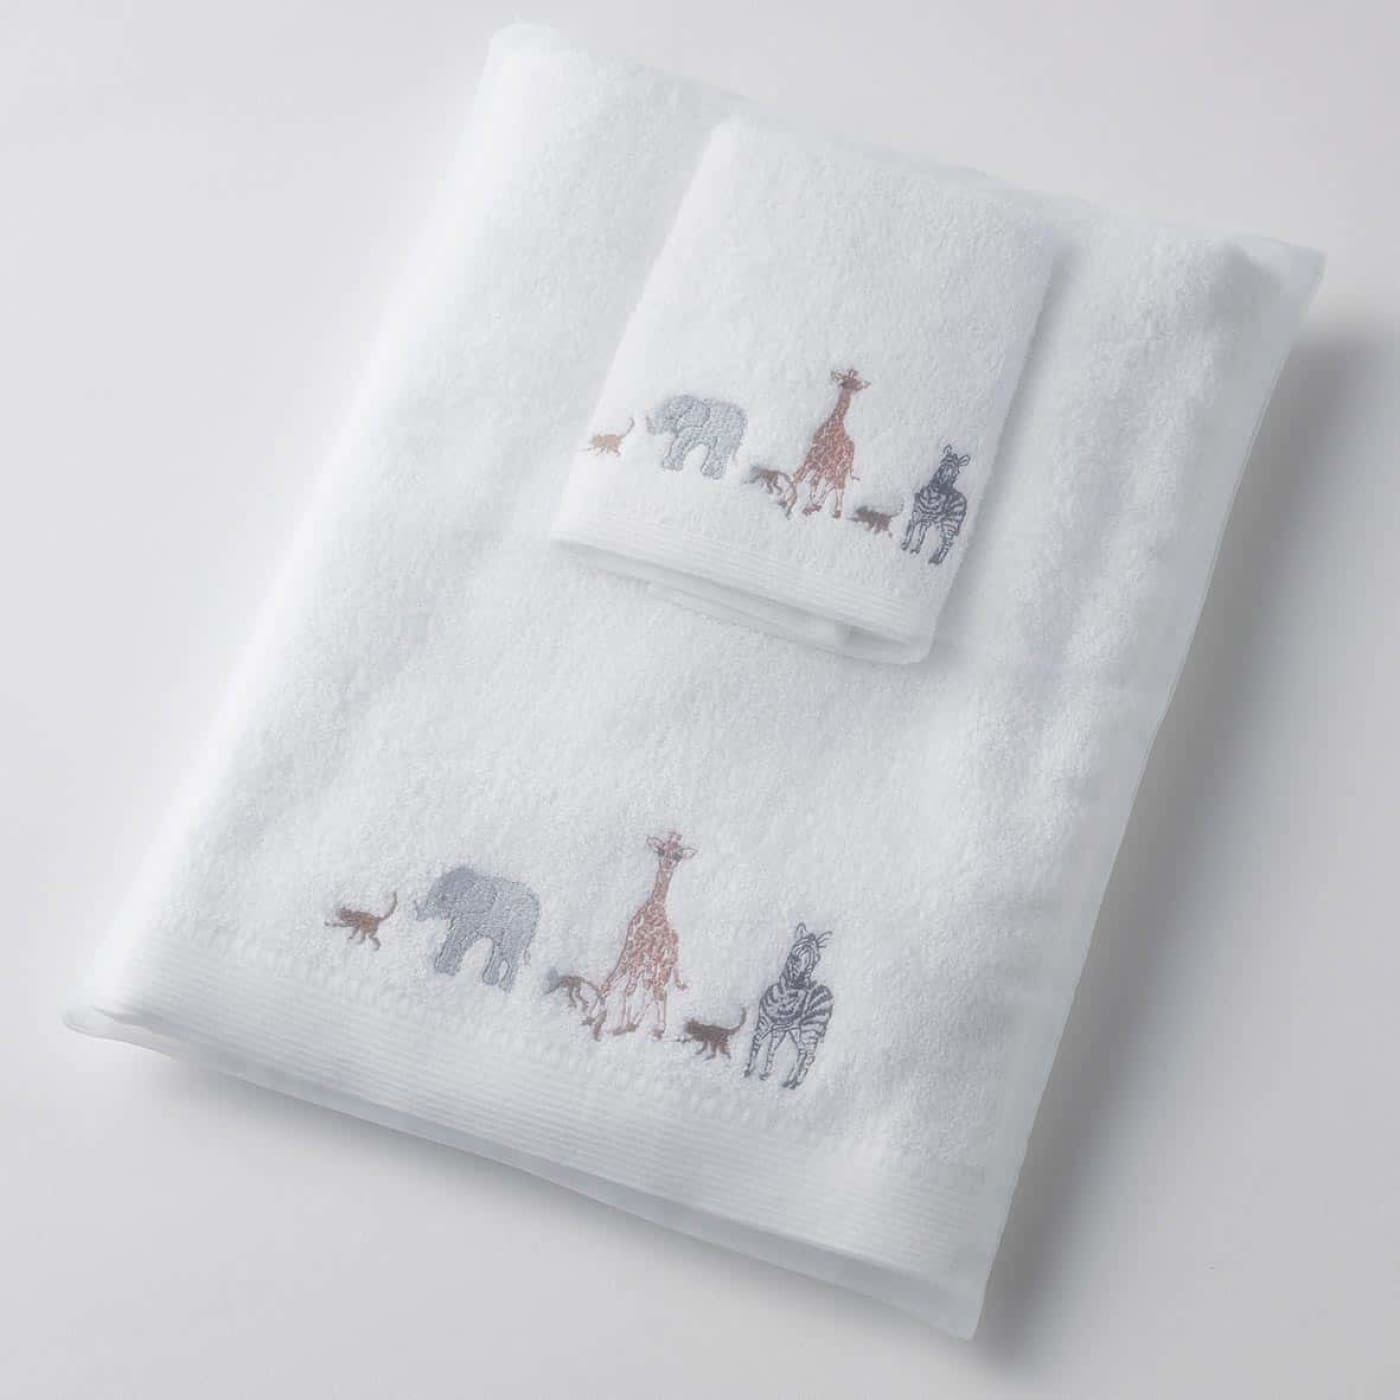 Jiggle & Giggle Towel & Face Washer Set in Organza Bag - Zoo Life - Zoo Life - BATHTIME & CHANGING - TOWELS/WASHERS